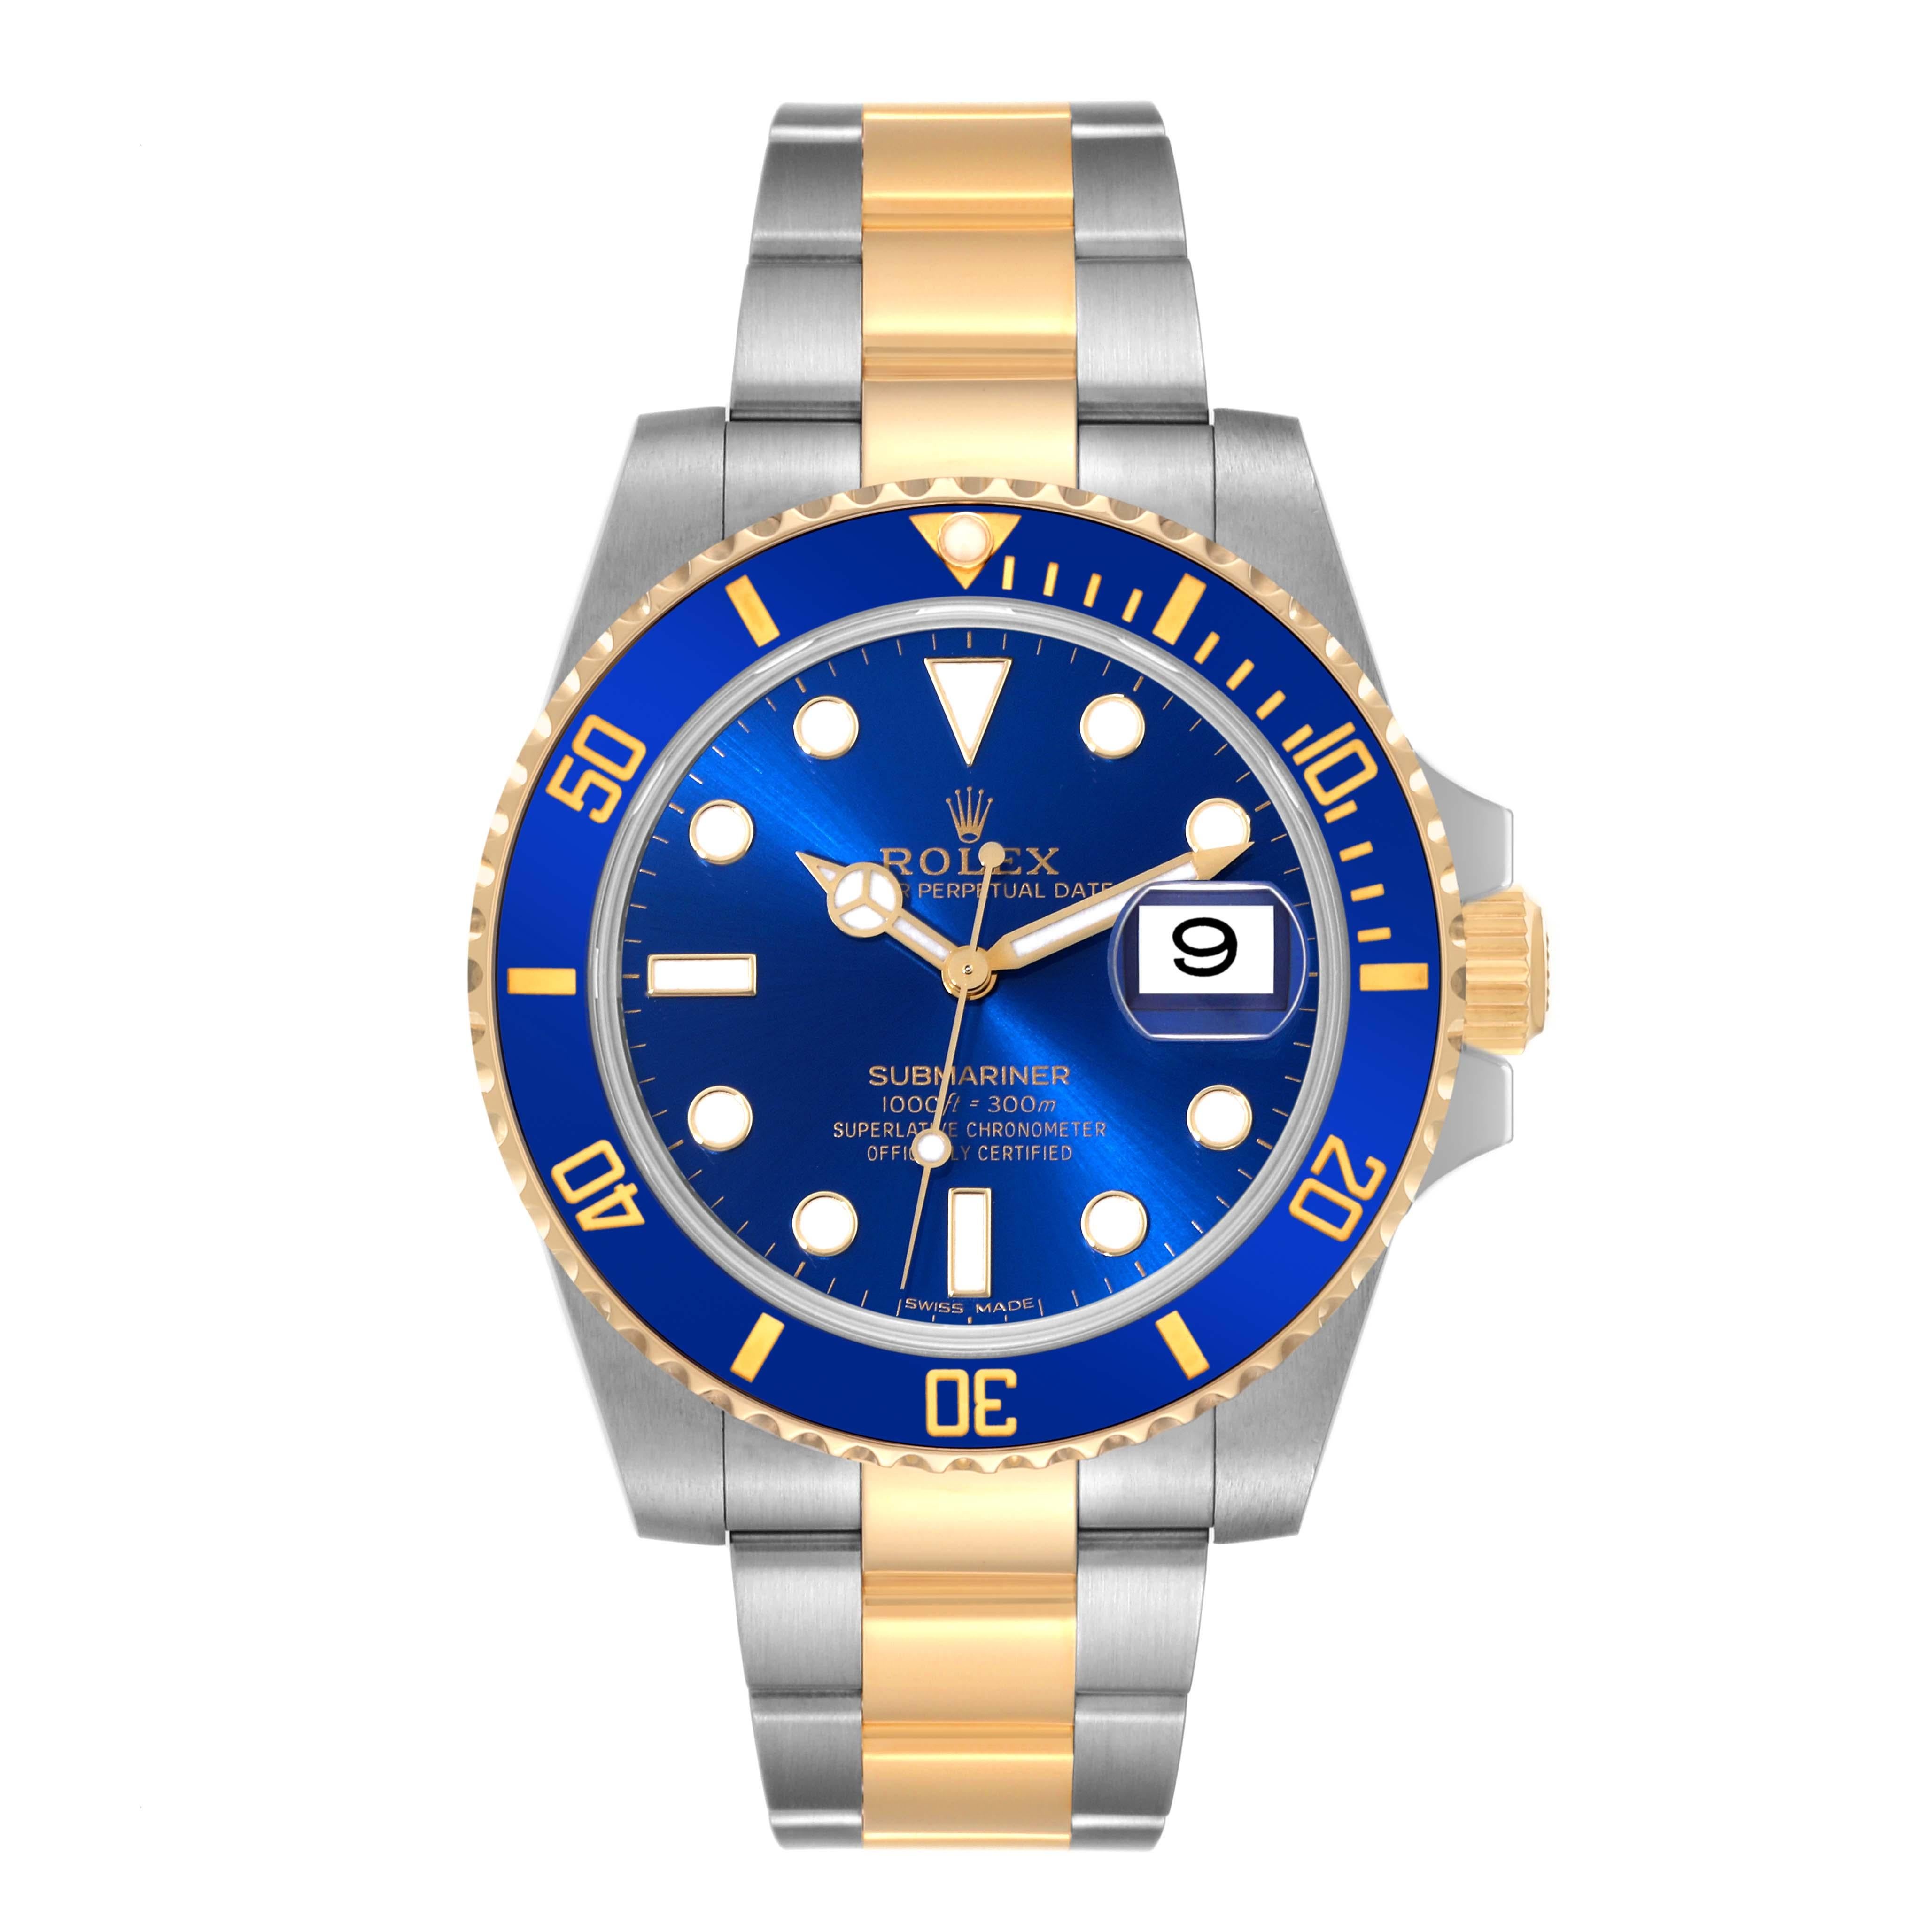 Rolex Submariner Steel Yellow Gold Blue Dial Mens Watch 116613 Box Card. Officially certified chronometer self-winding movement. Stainless steel and 18k yellow gold case 40.0 mm in diameter. Rolex logo on the crown. Ceramic blue Ion-plated special